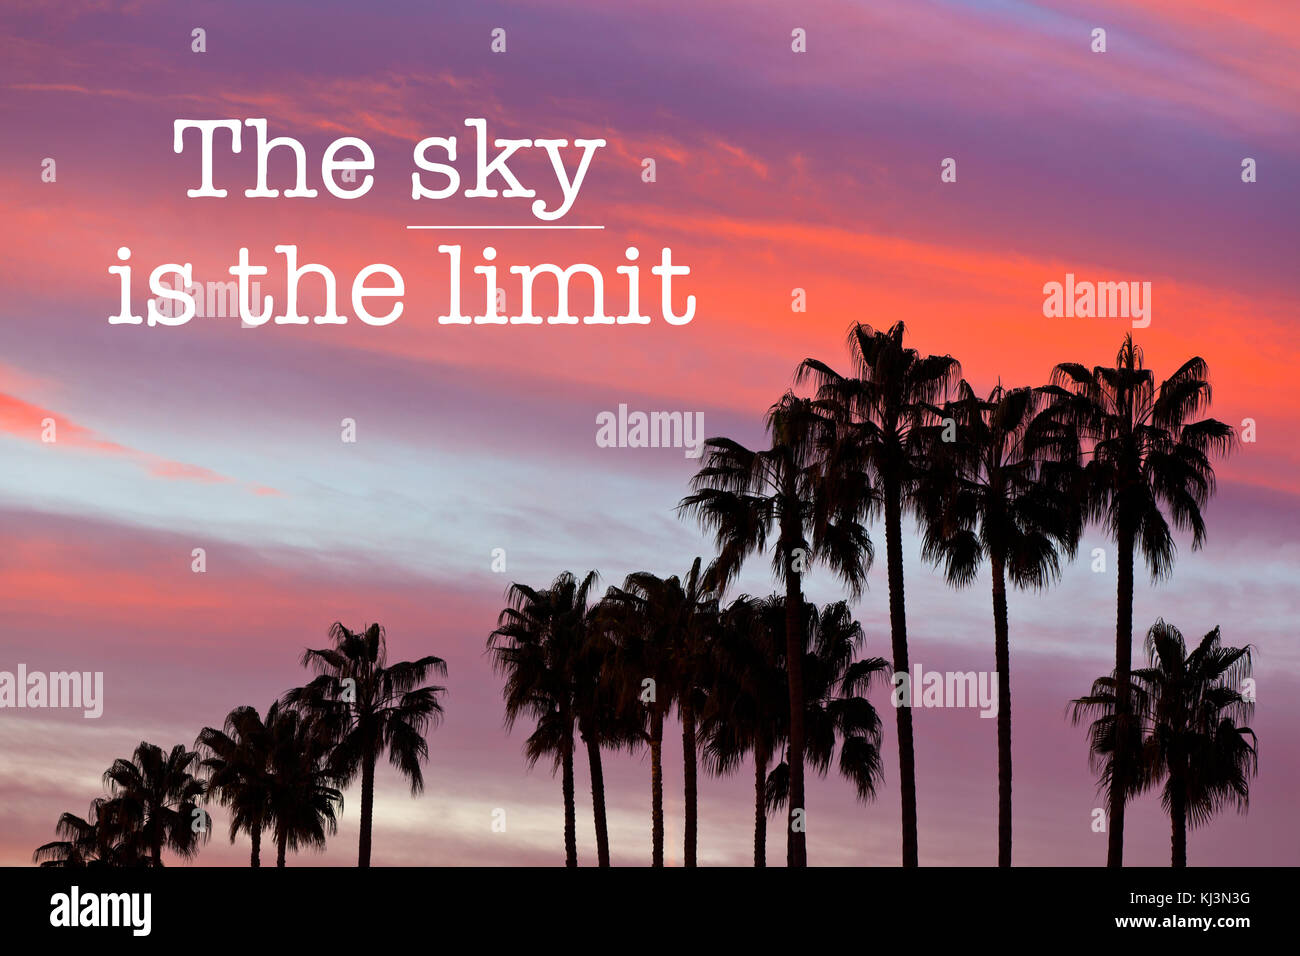 sky is the limit quote